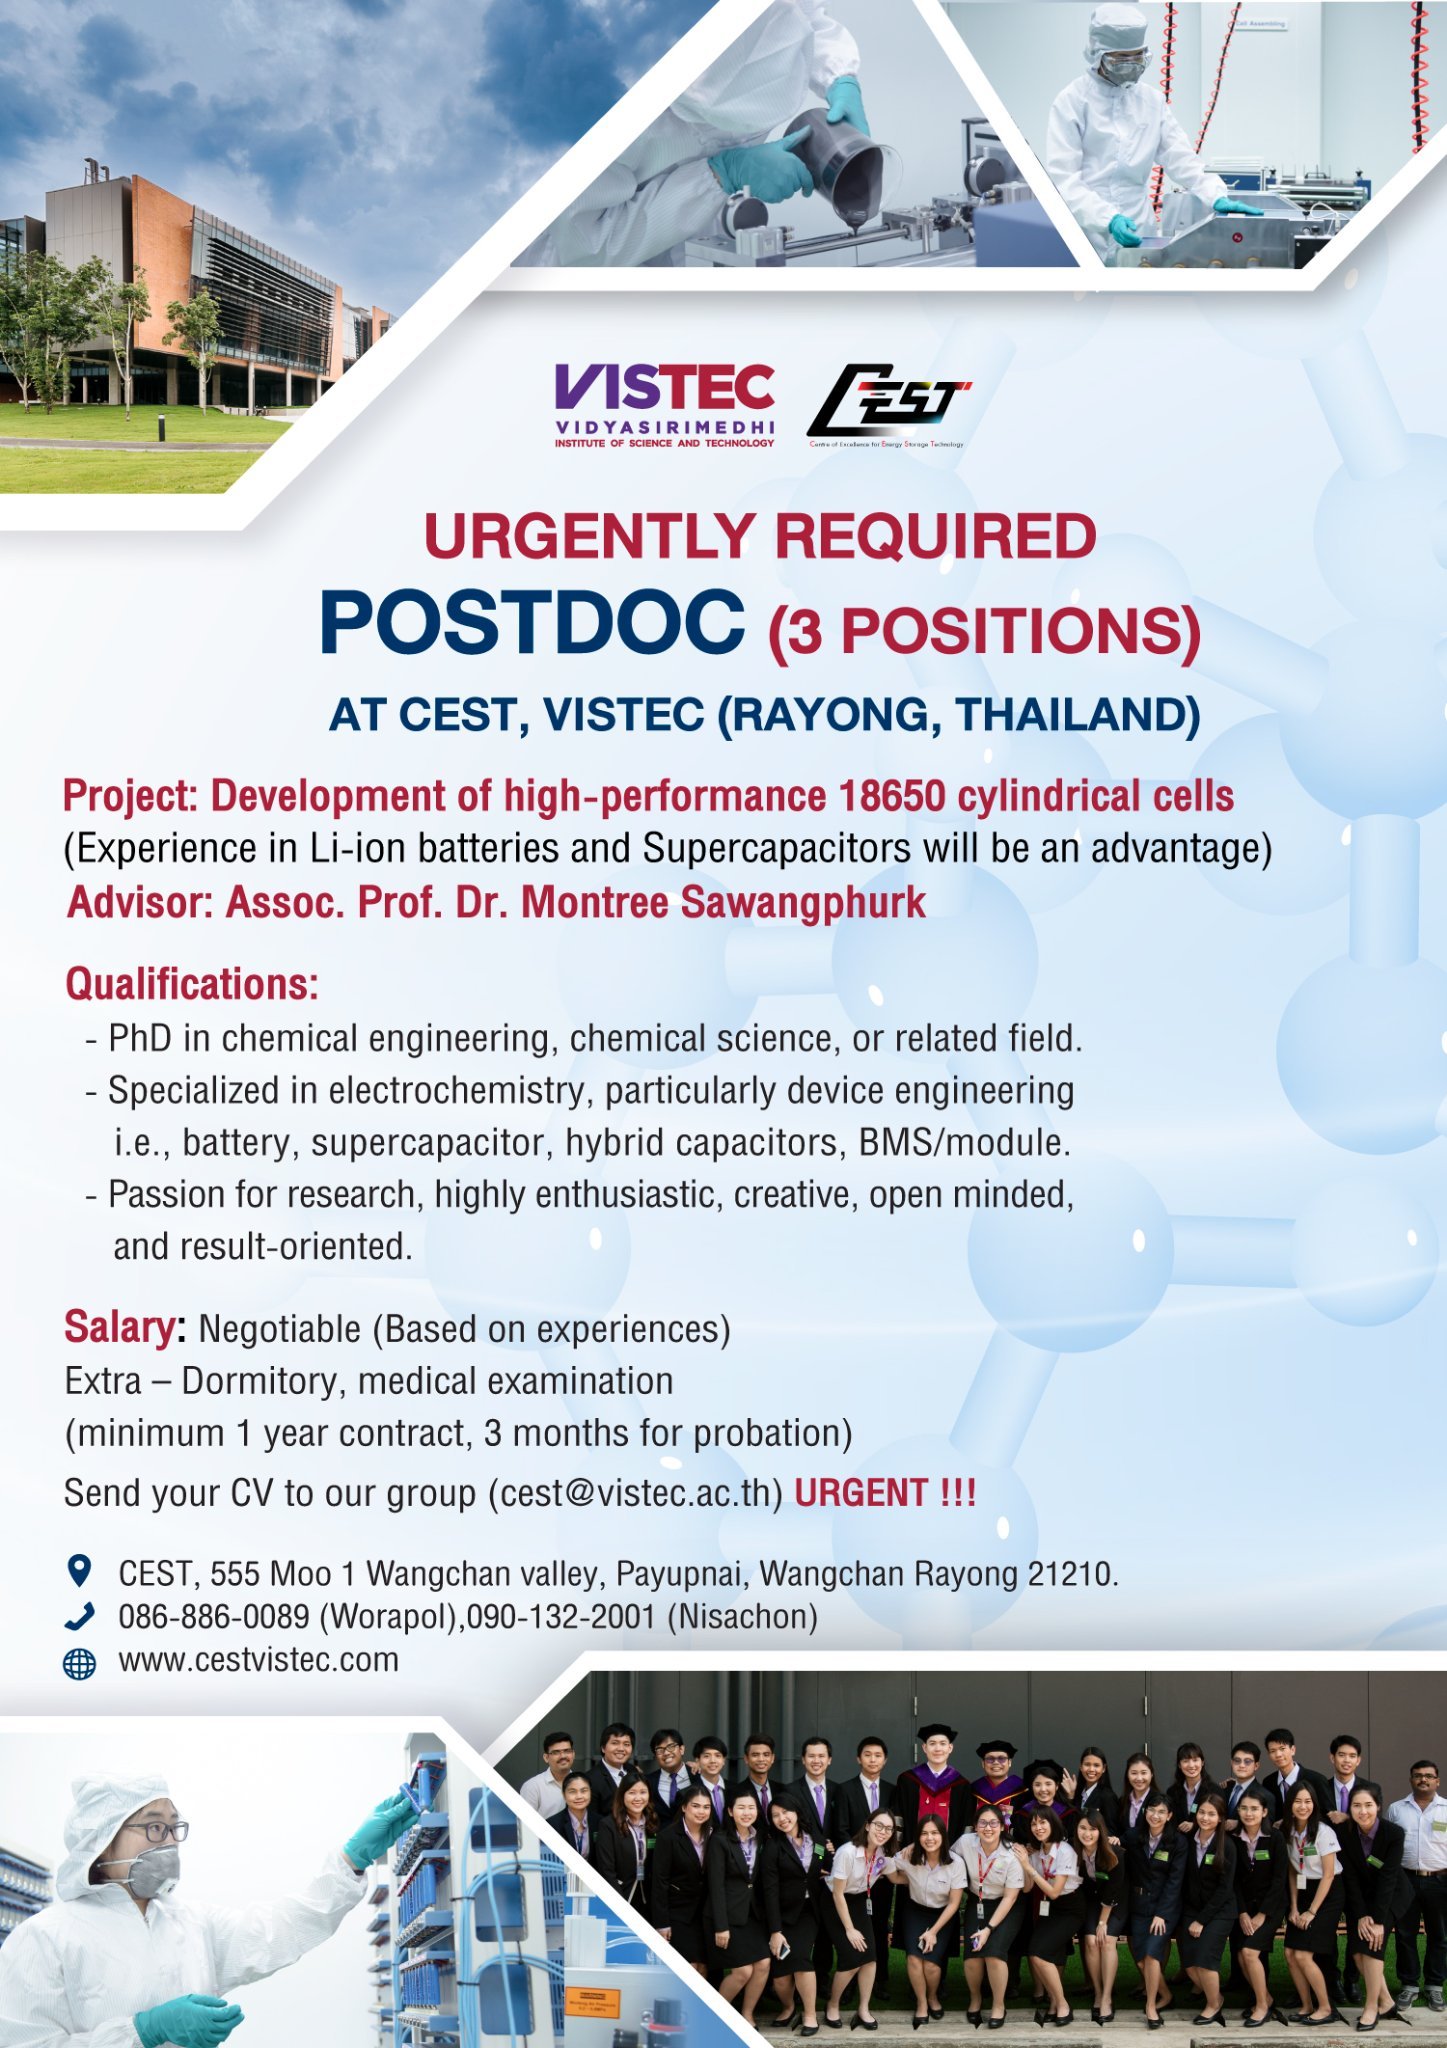 URGENTLY REQUIRED POSTDOC (3 POSITIONS) AT CEST, VISTEC (RAYONG, THAILAND)